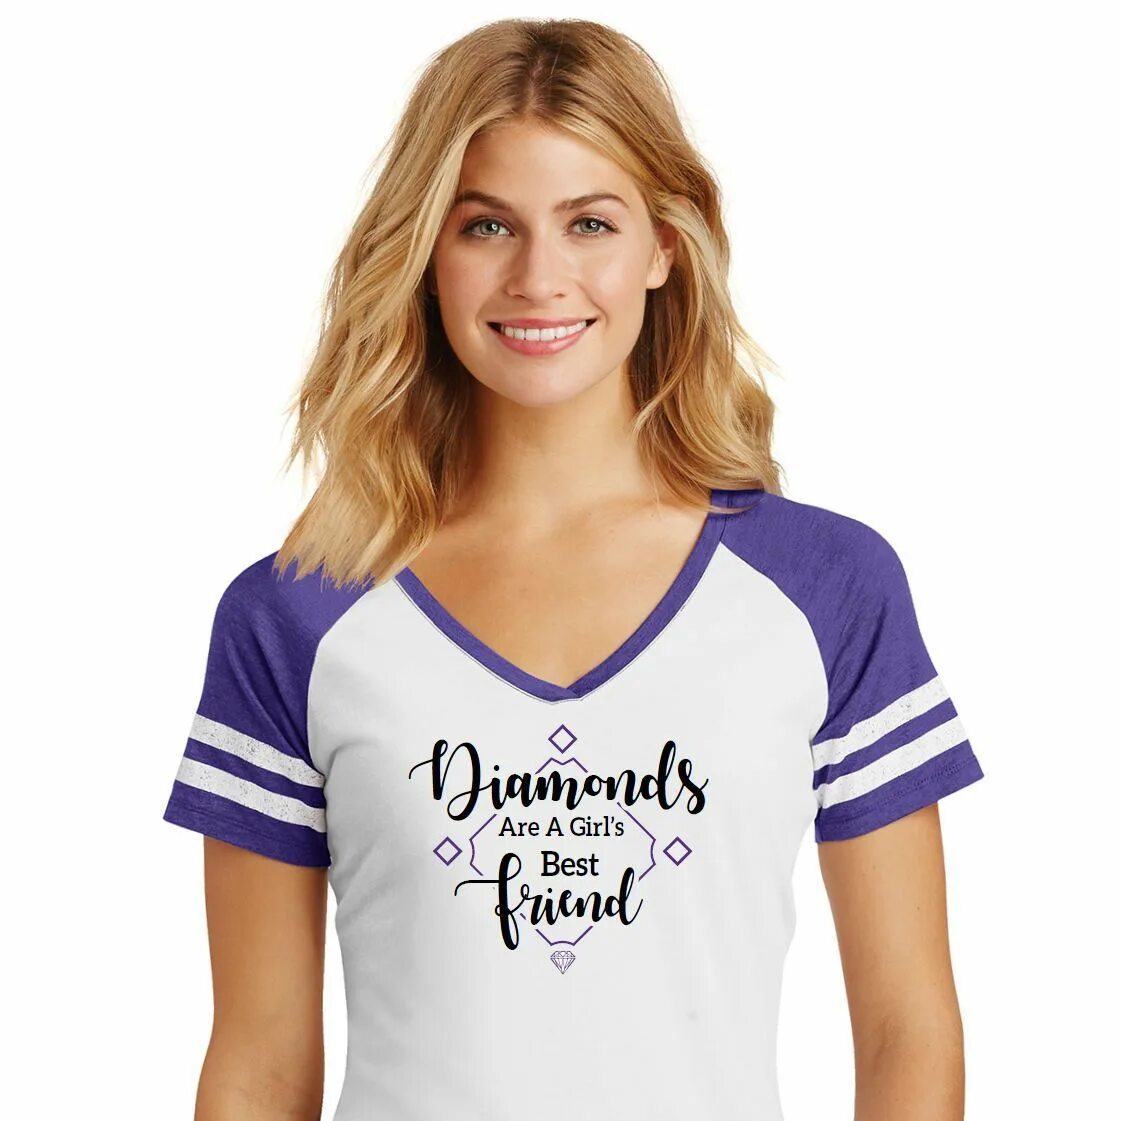 V-Neck t-Shirt. Diamonds are girl’s best friend футболка. А лав герл френд футболка. Бест герлз перевод. This girl is the best